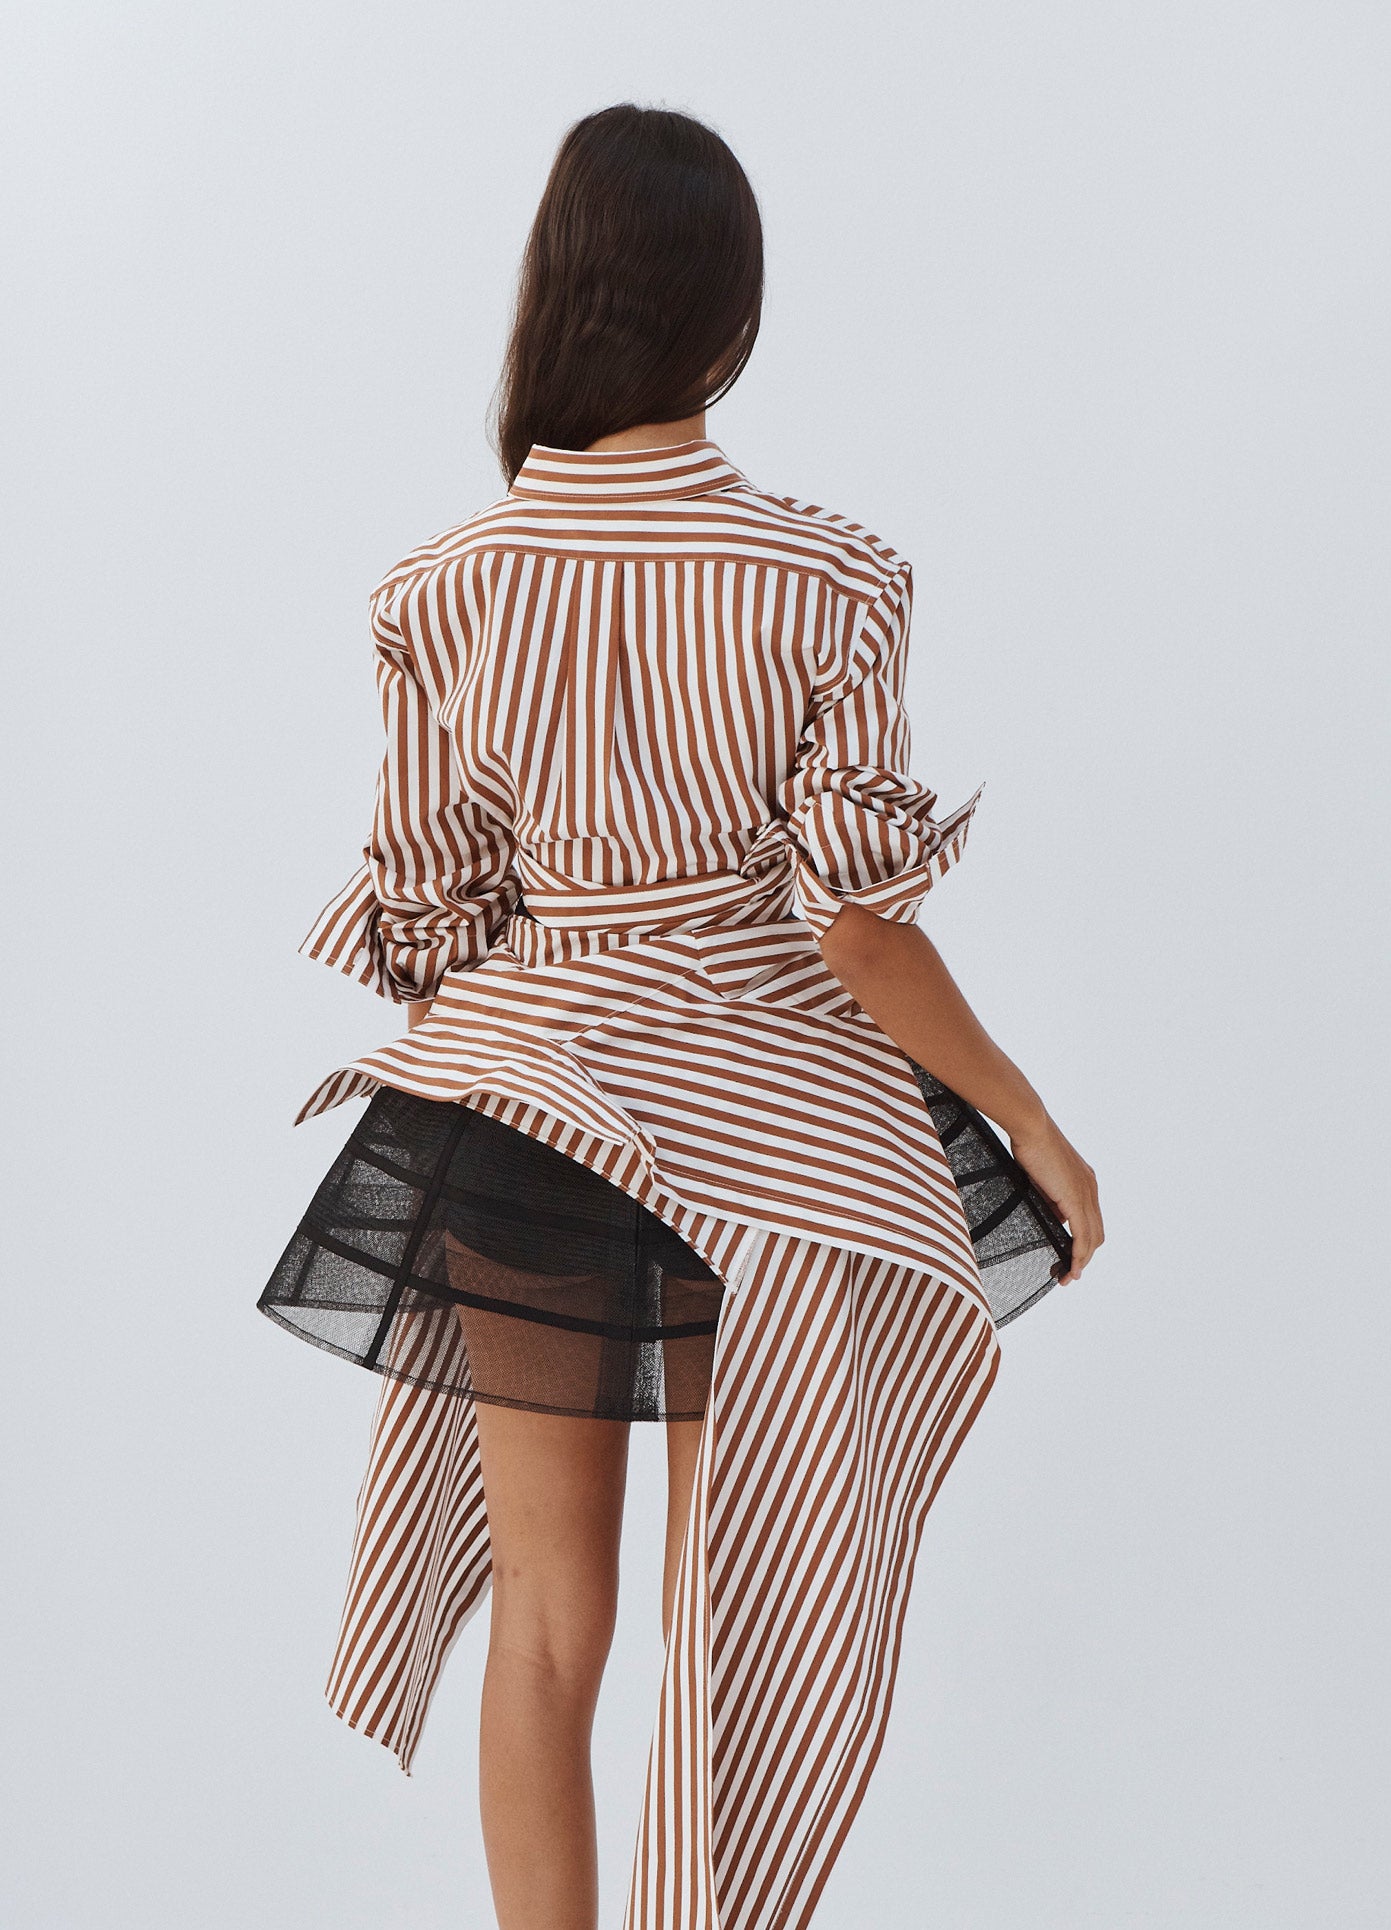 MONSE Striped Long Sleeve Shirt in Brown and Ivory on Model Back View